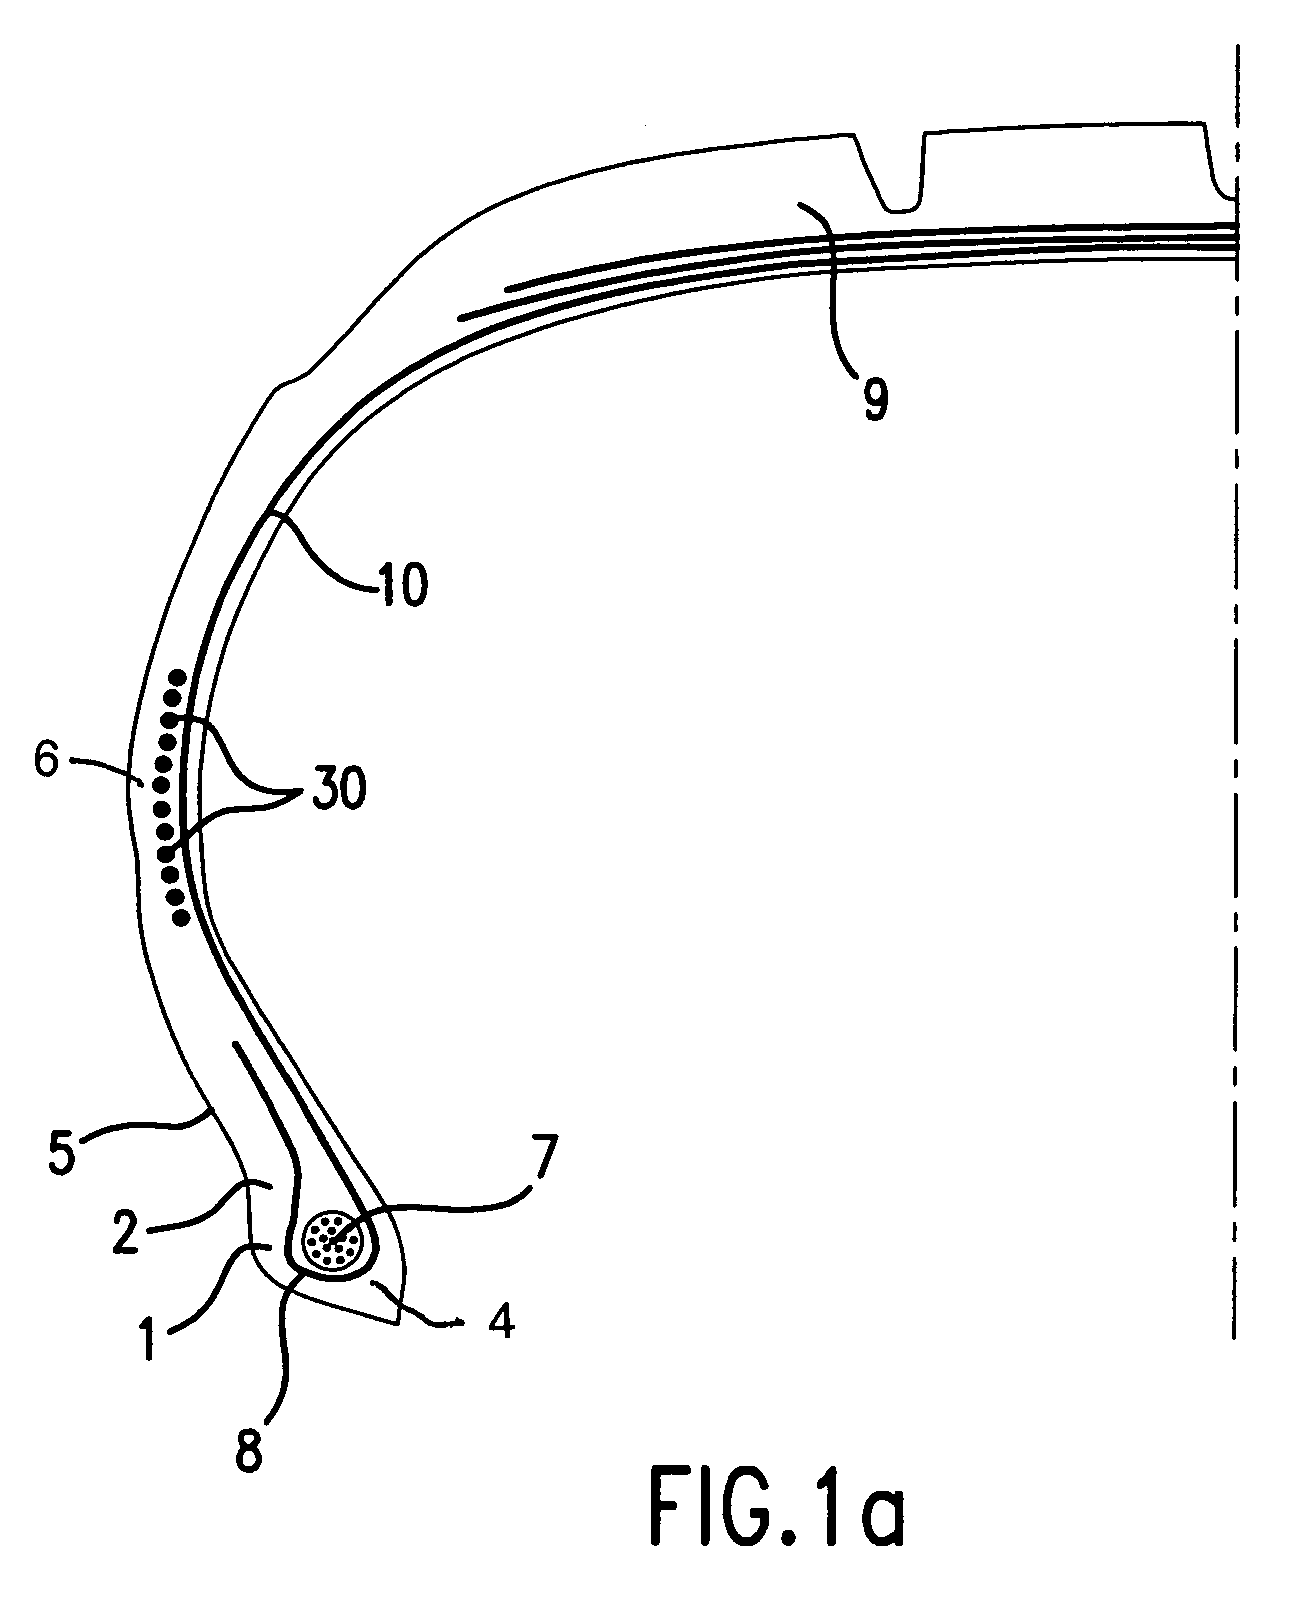 Extended mobility tire with undulating sidewalls